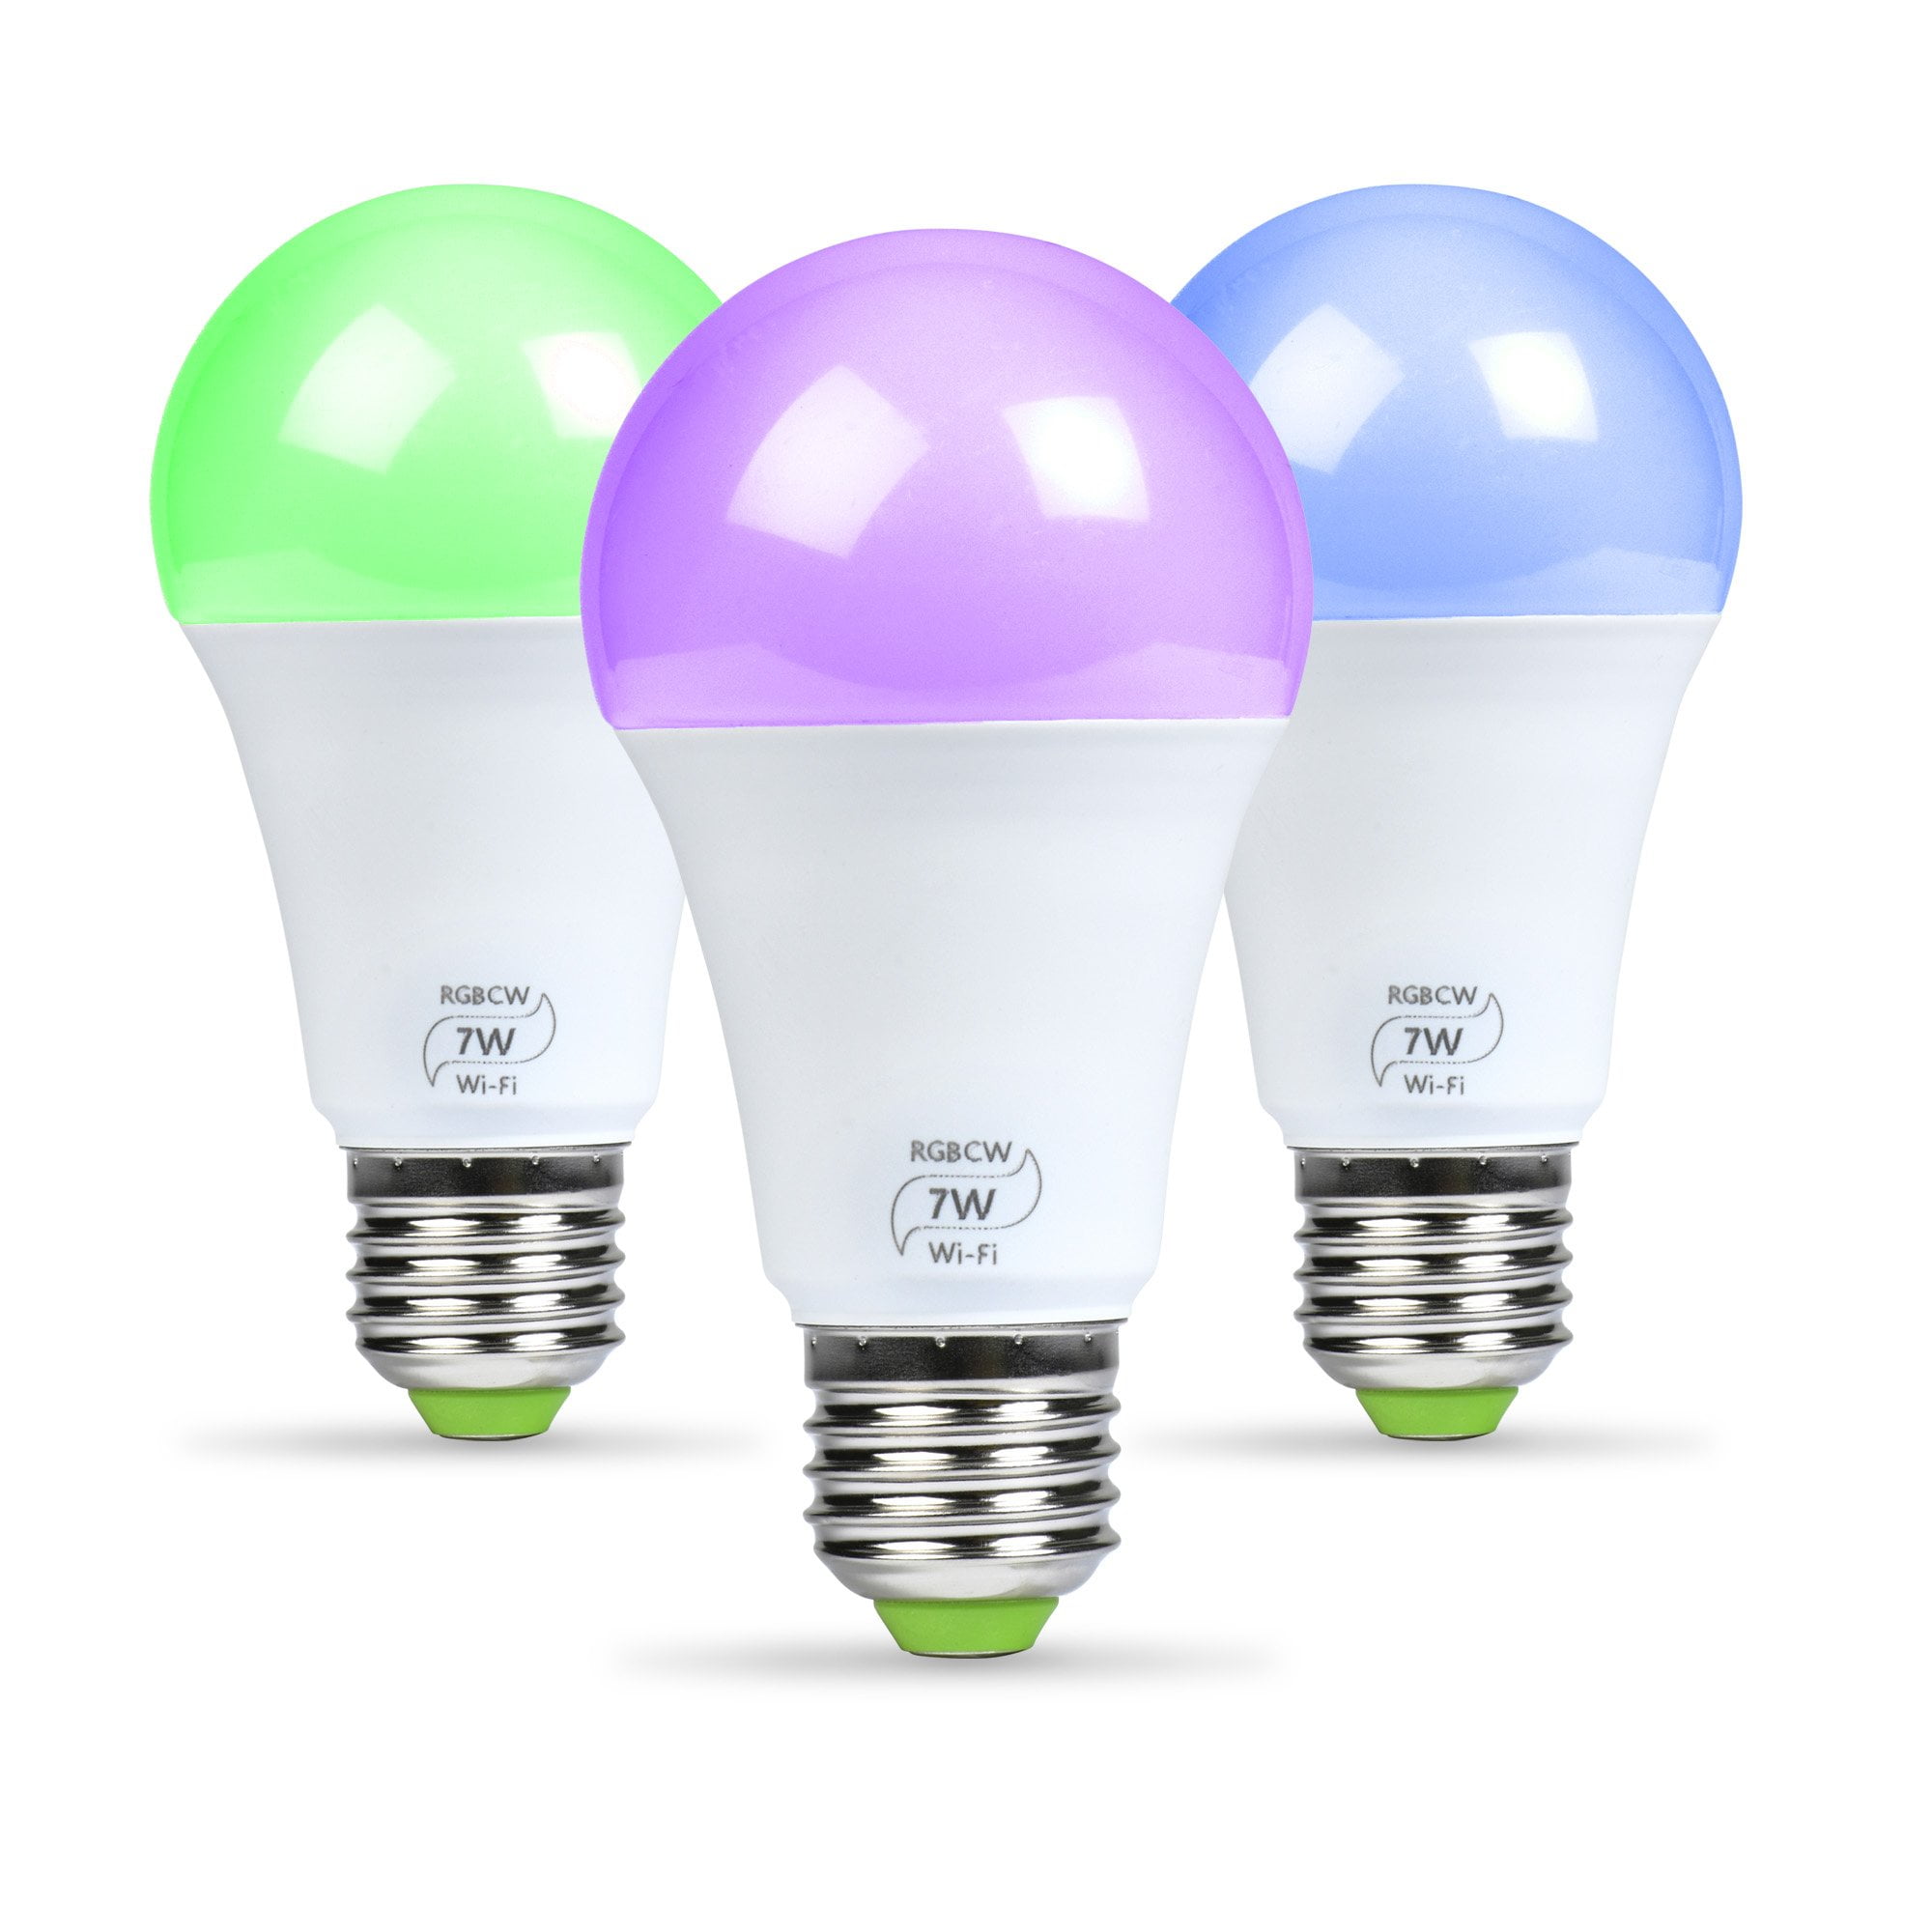 No Hub Required 7W Equivalent 60W RGB Color Changing Bulb Google Home and IFTTT Jiadi Smart LED Light Bulb E27 WiFi Multicolor Light Bulb Work with Alexa 4 Pack 